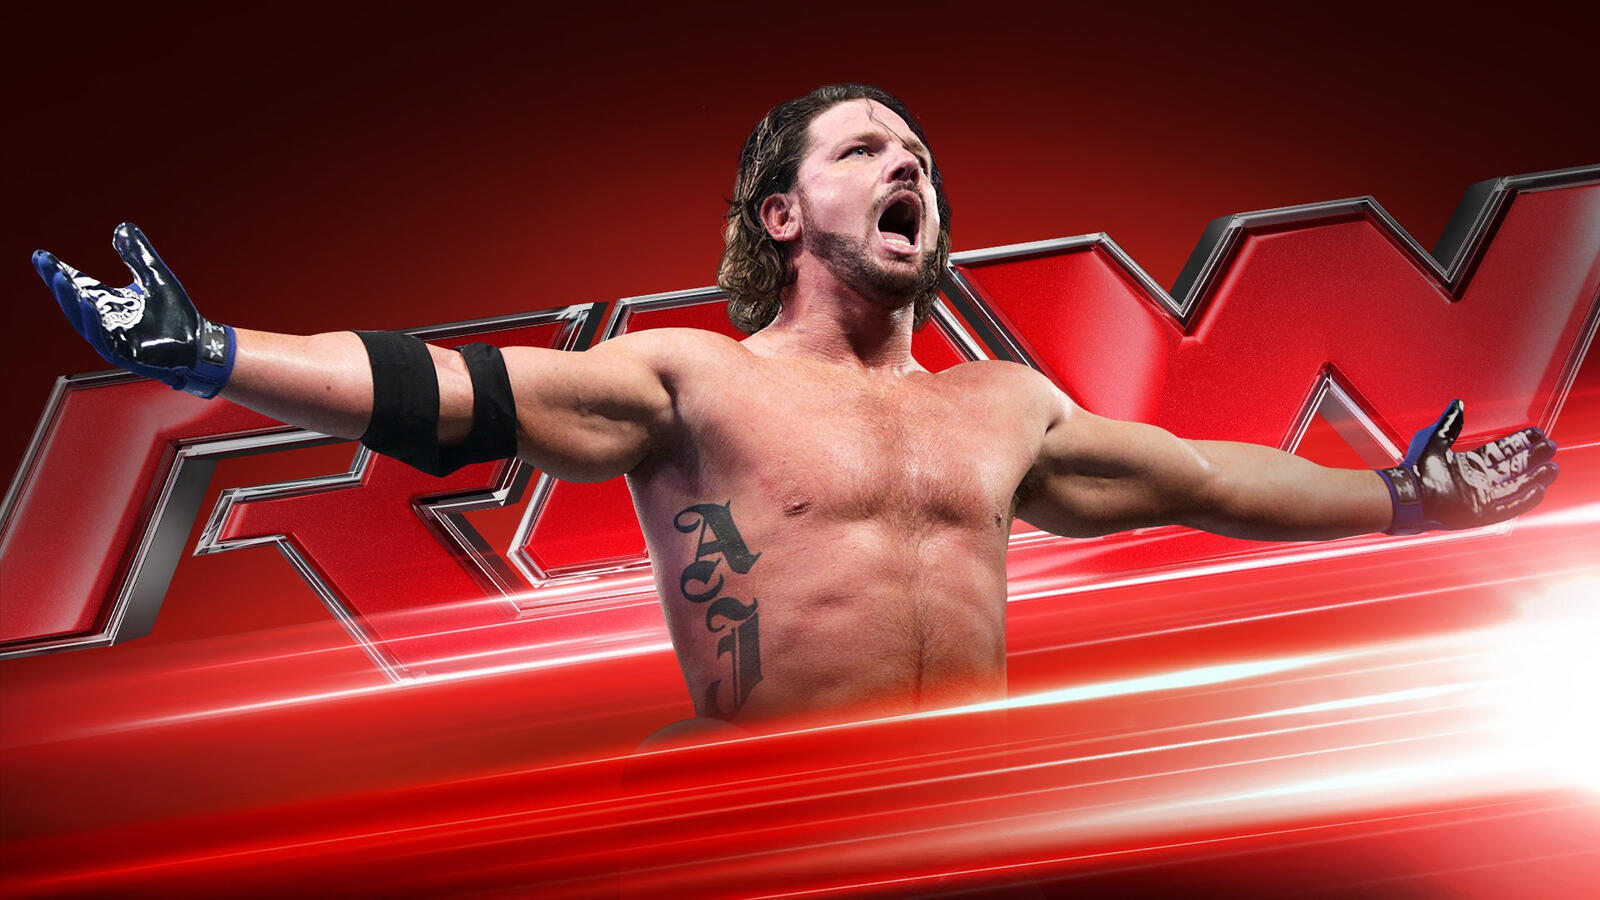 After winning last week’s Raw main event, AJ Styles has earned the right to...